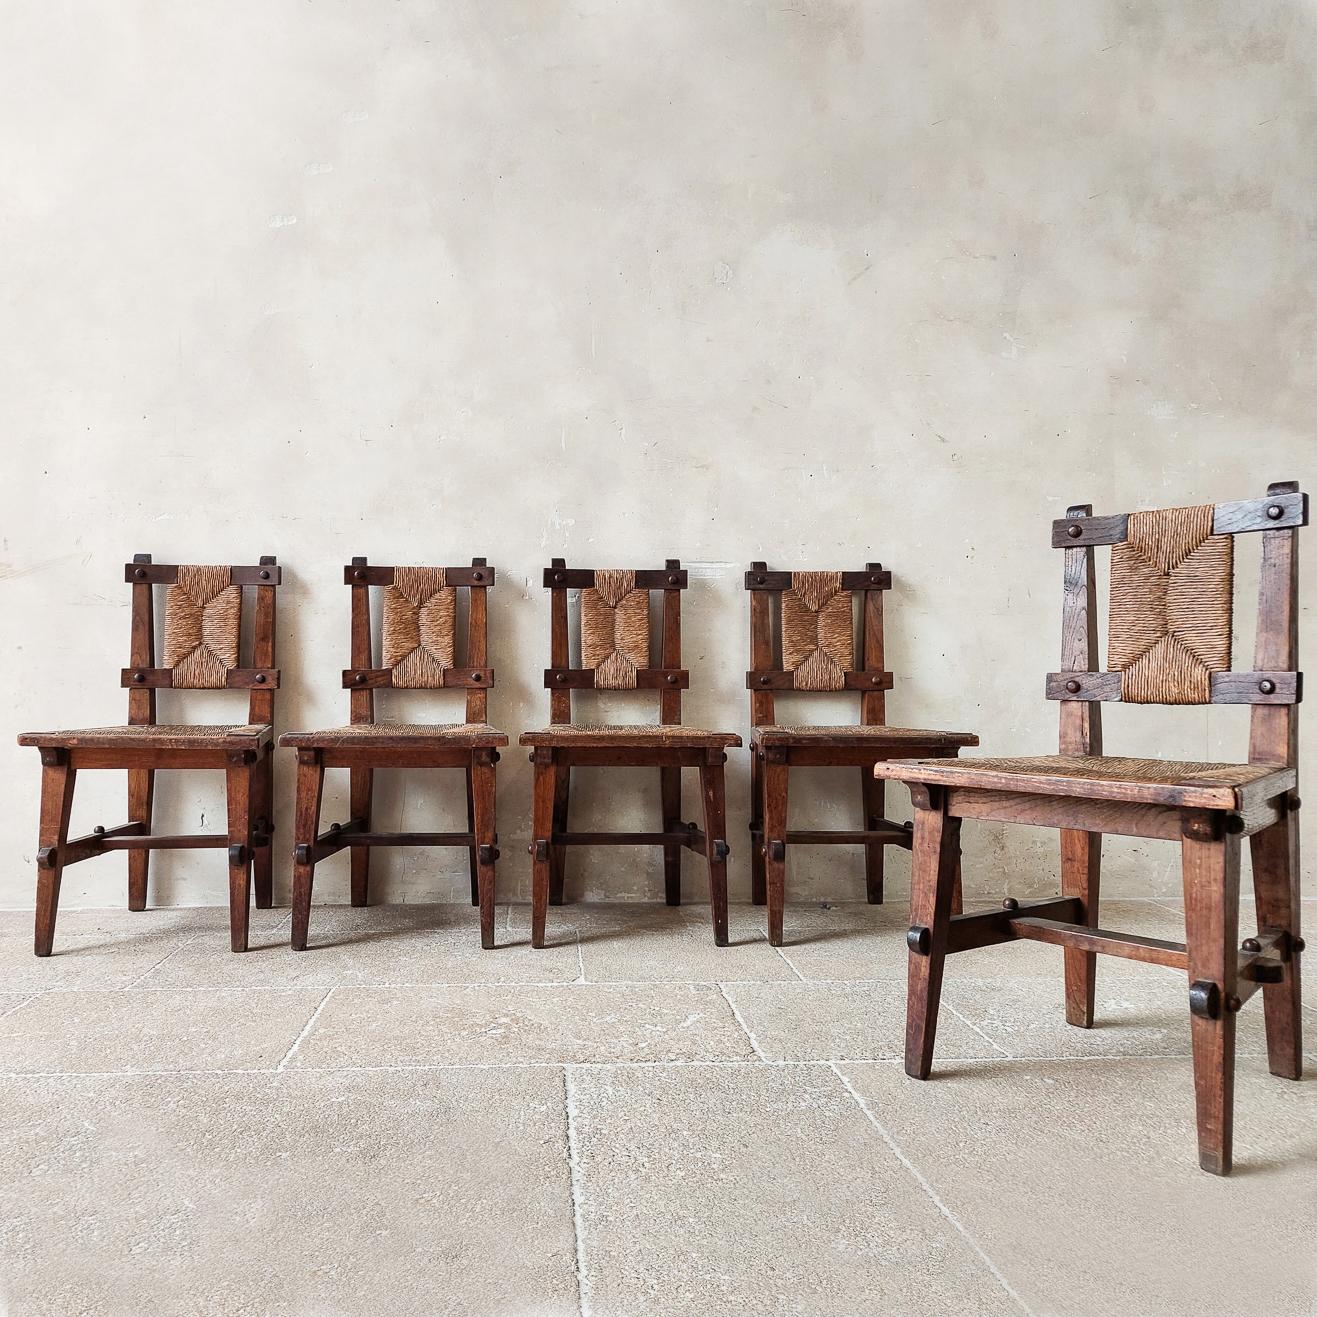 Set of five Mid-century Brutalist style Spanish Finca dining room chairs in oak wood with rush straw seats and backrests. 


h 84 x w 46 x d 45 cm
seat height 44 cm